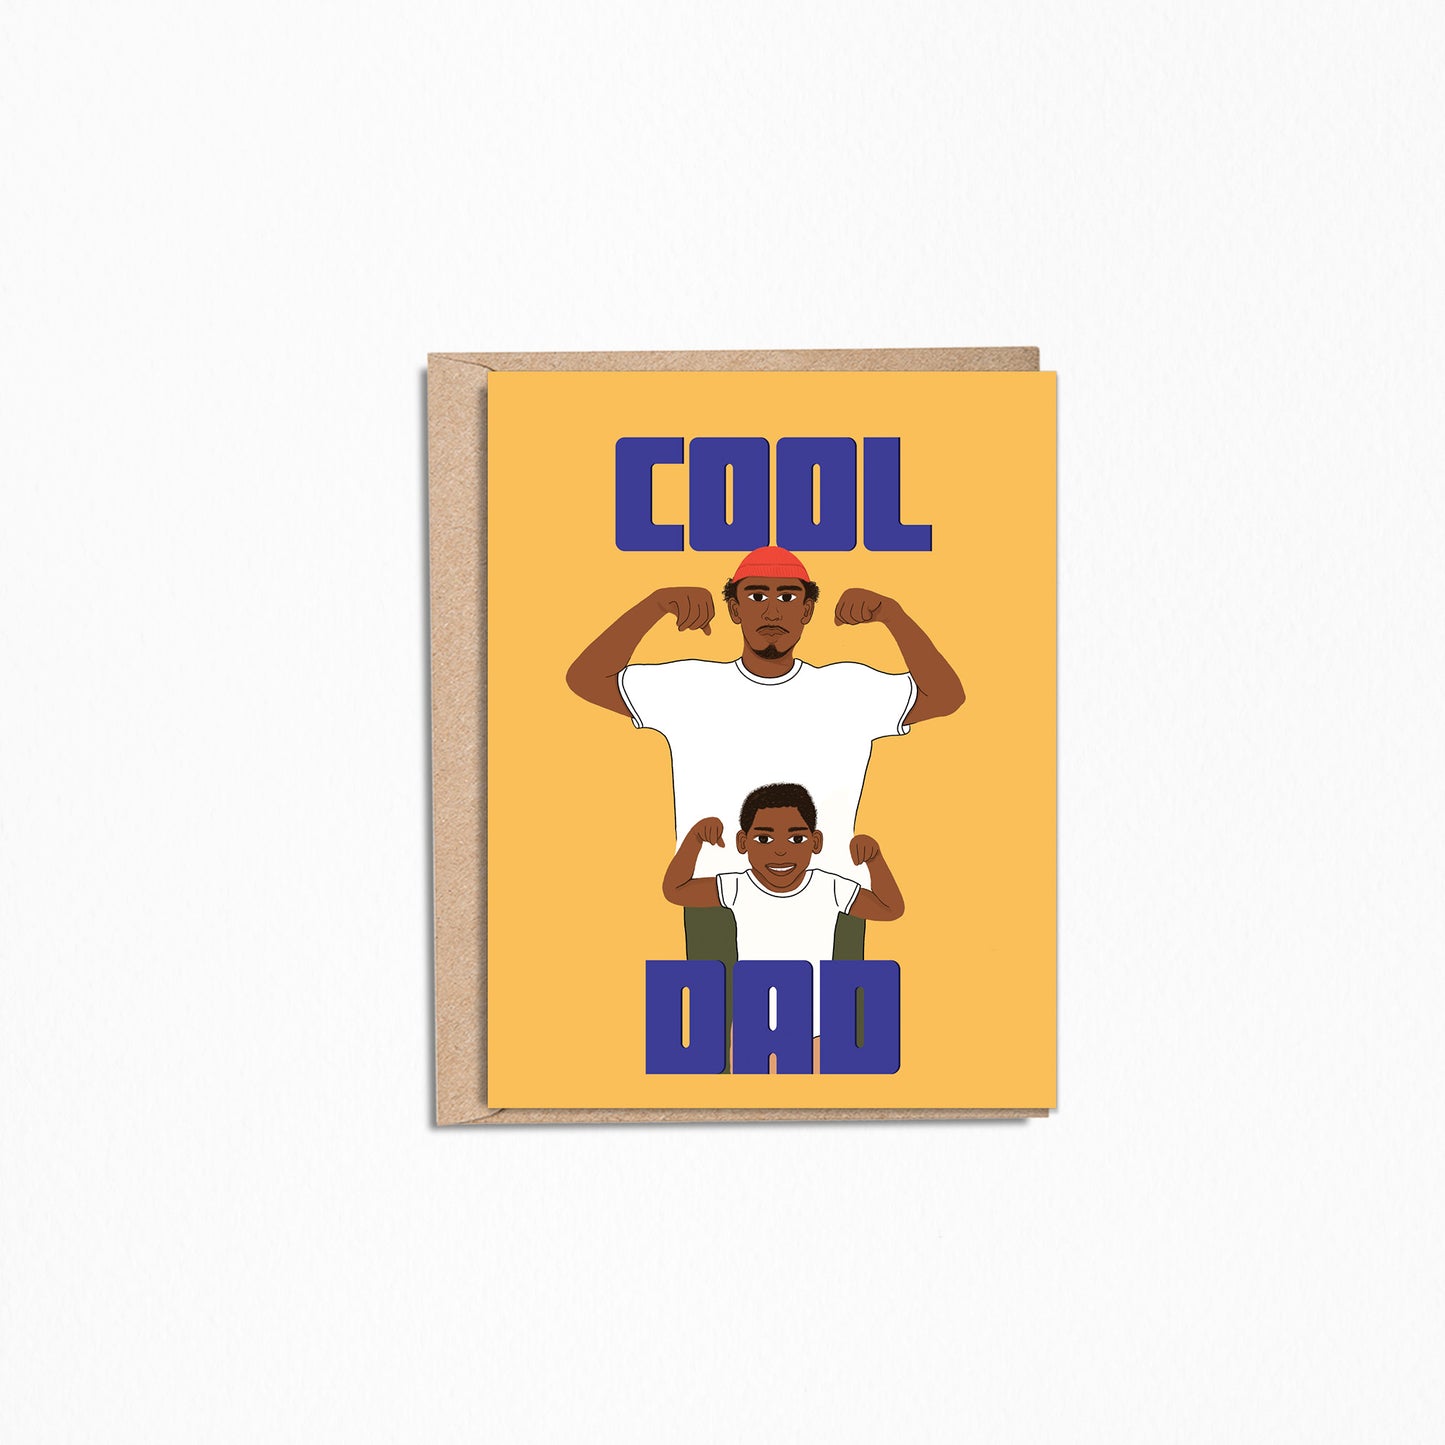 Cool Dad 4.25x5.5” Father's Day Dad greeting card. Black Dad and Son Card. Colorful Eco-friendly Card for Dad from Goods Made By Digitrillnana, Ashley Fletcher. Black Woman Owned. Gifts celebrating Black, African-American culture. Perfect everyday card for Dad and Father's day!